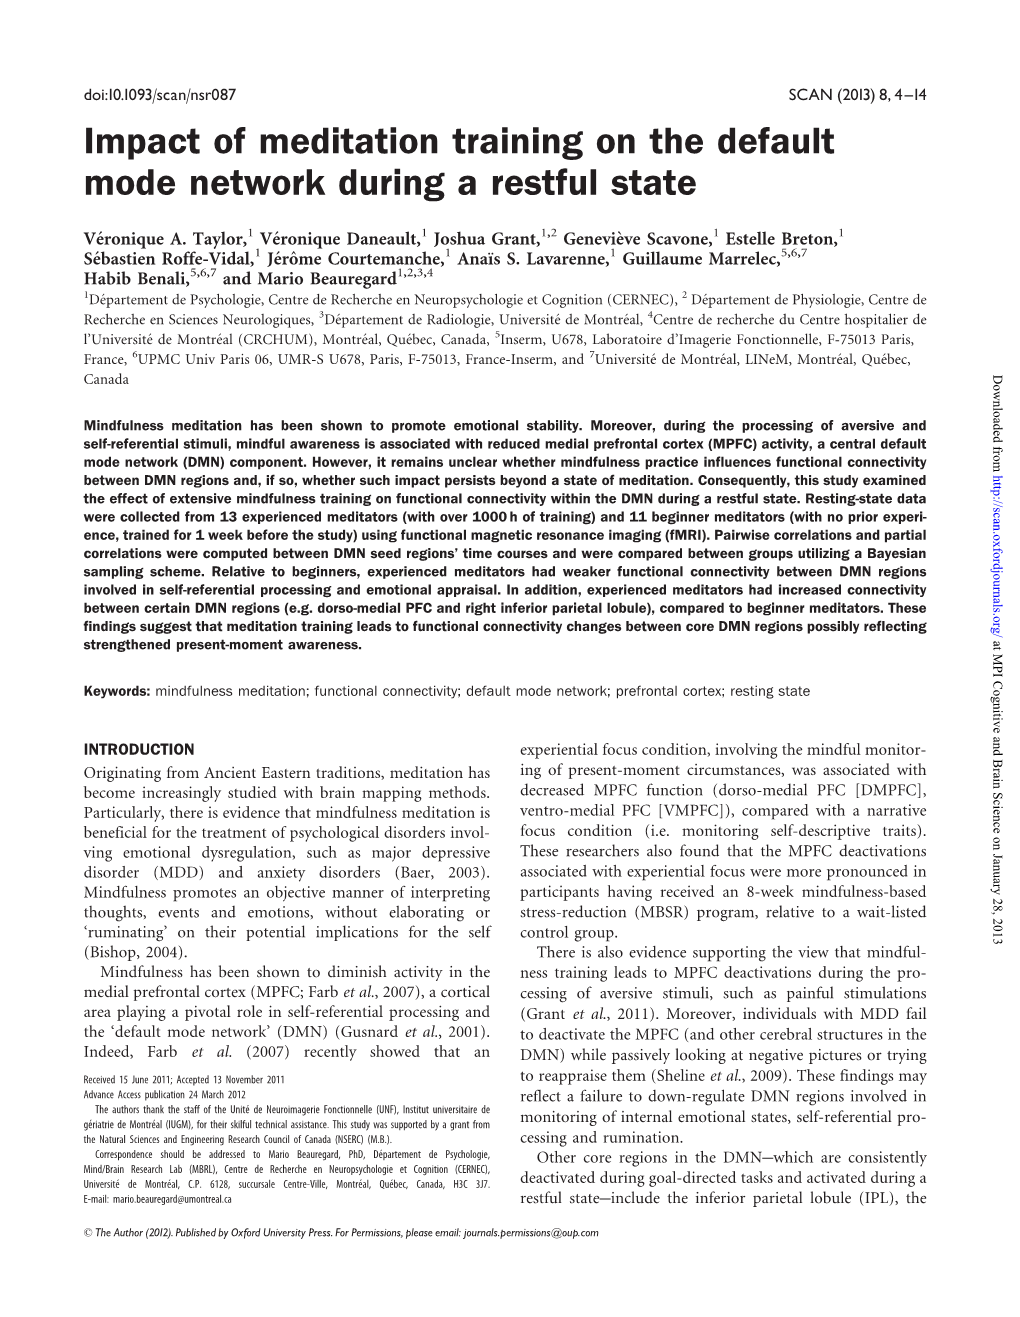 Impact of Meditation Training on the Default Mode Network During a Restful State